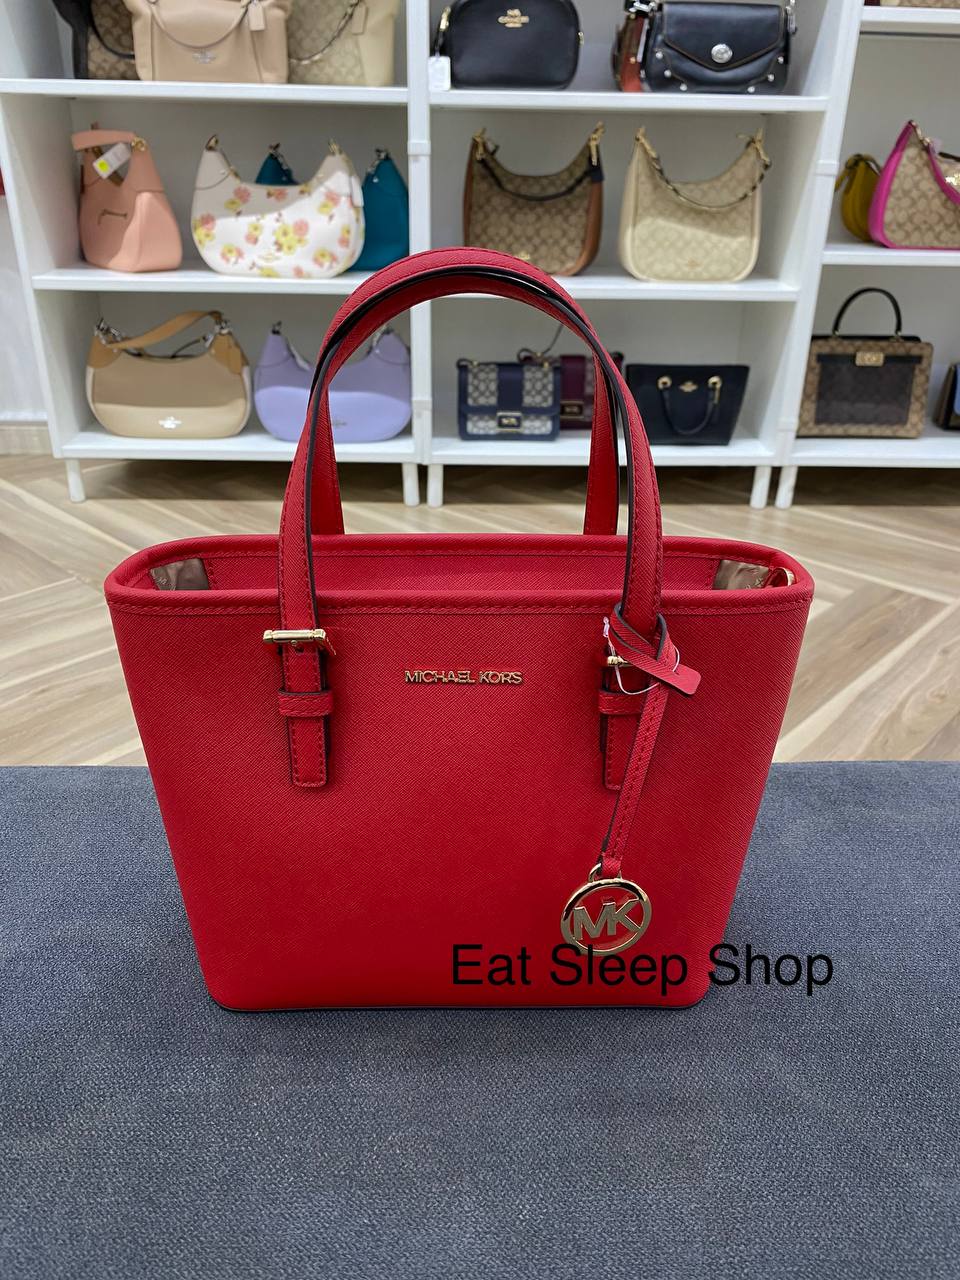 MICHAEL KORS JET SET TRAVEL XS CARRYALL CONVERTIBLE TOP ZIP TOTE IN BRIGHT RED